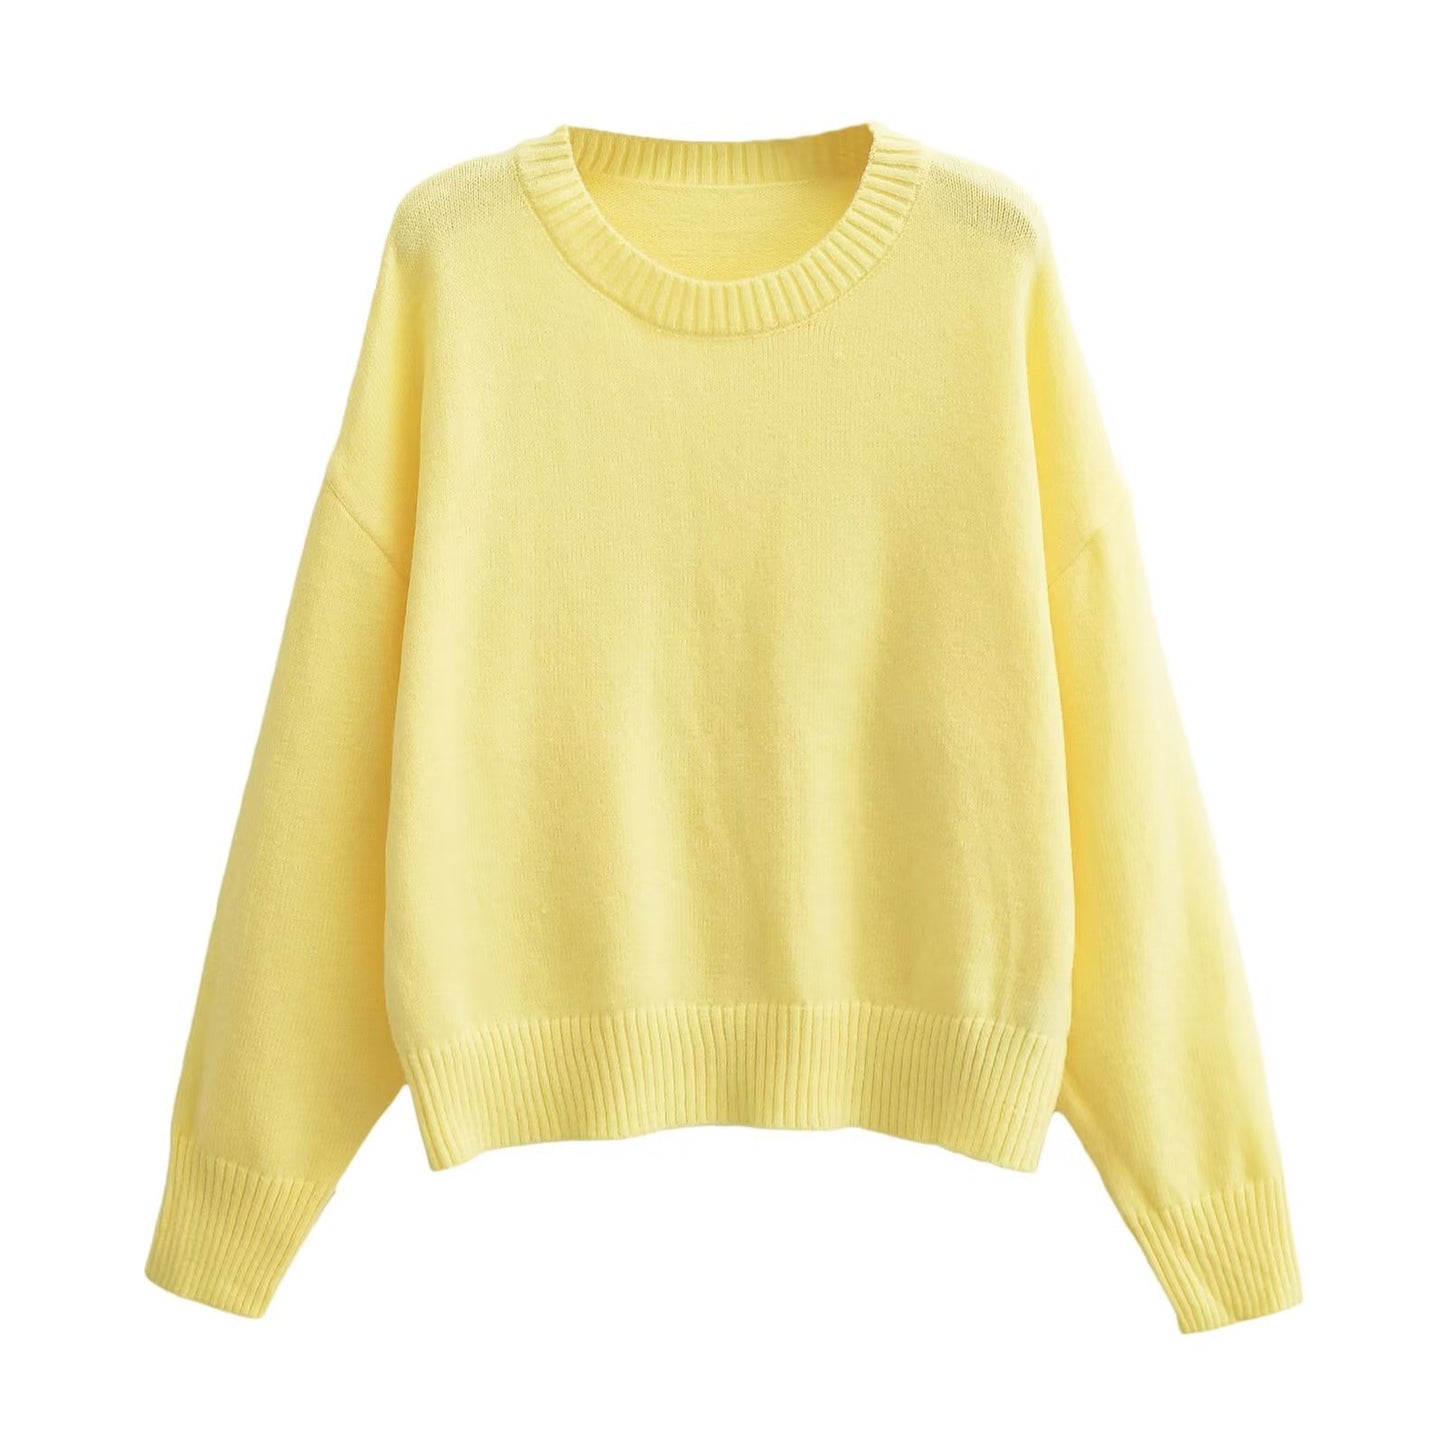 Fall Women Clothing Solid Color Long Sleeve Soft Pullover Sweater